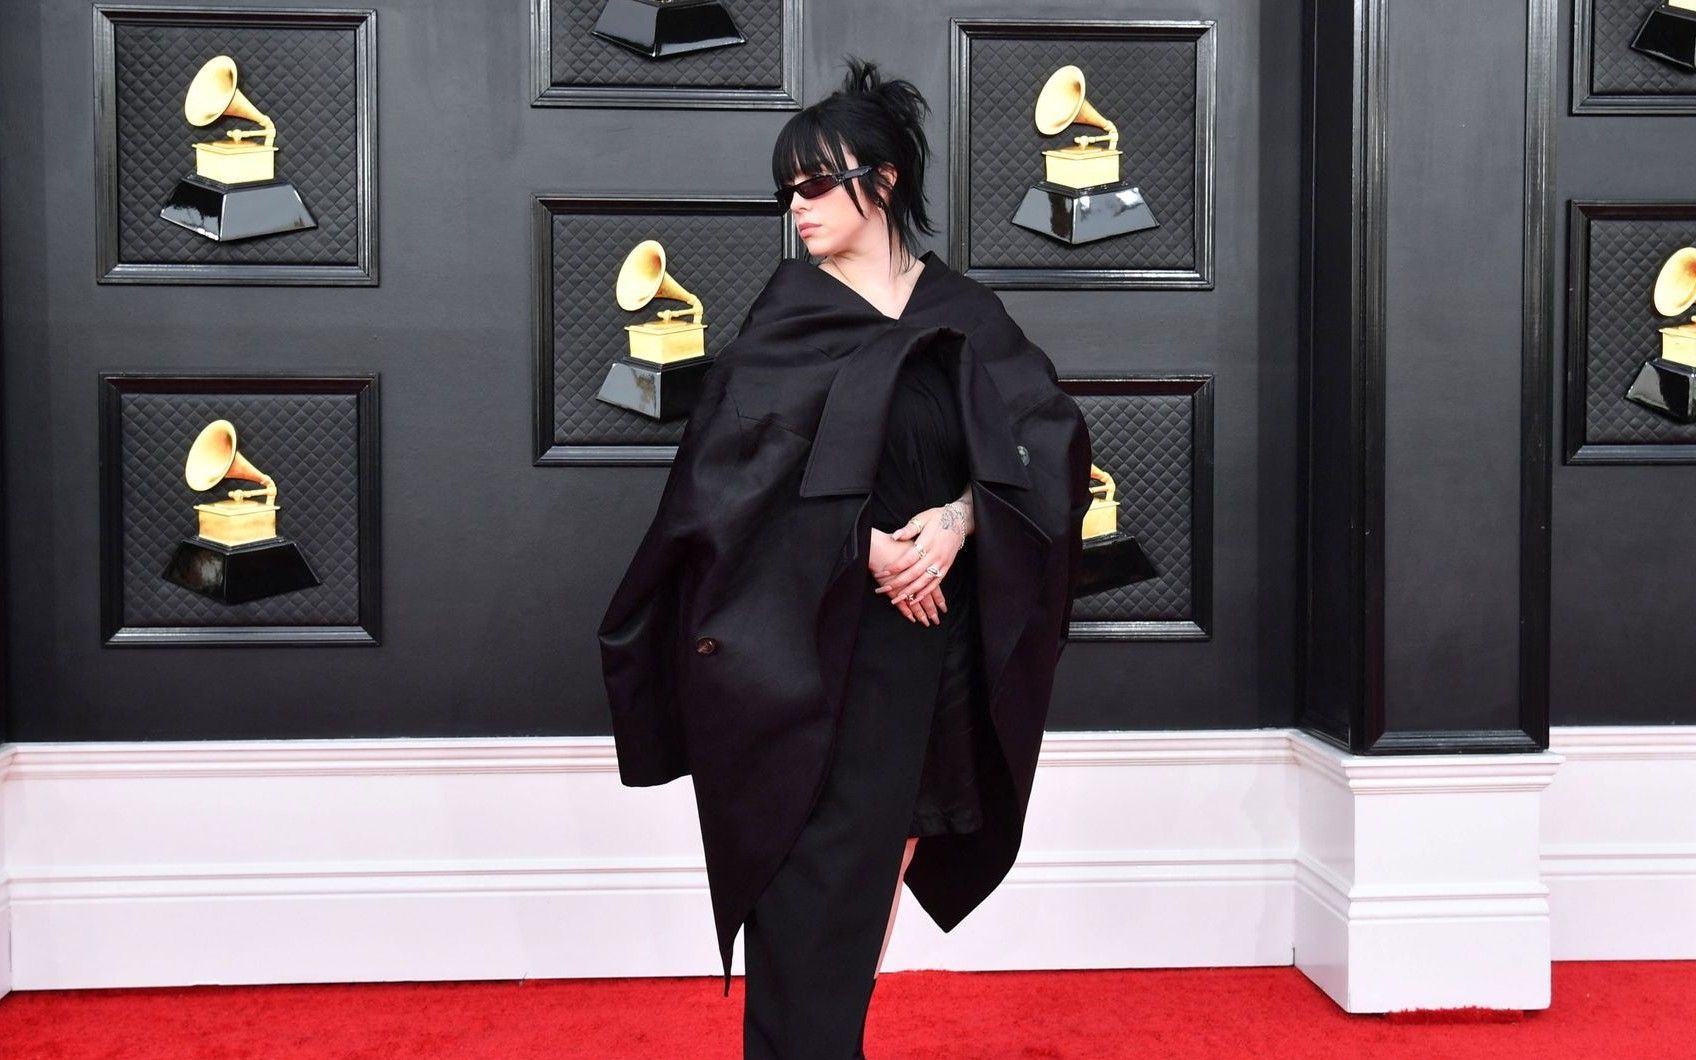 Rick Owens was the unsuspected star of the latest red carpets